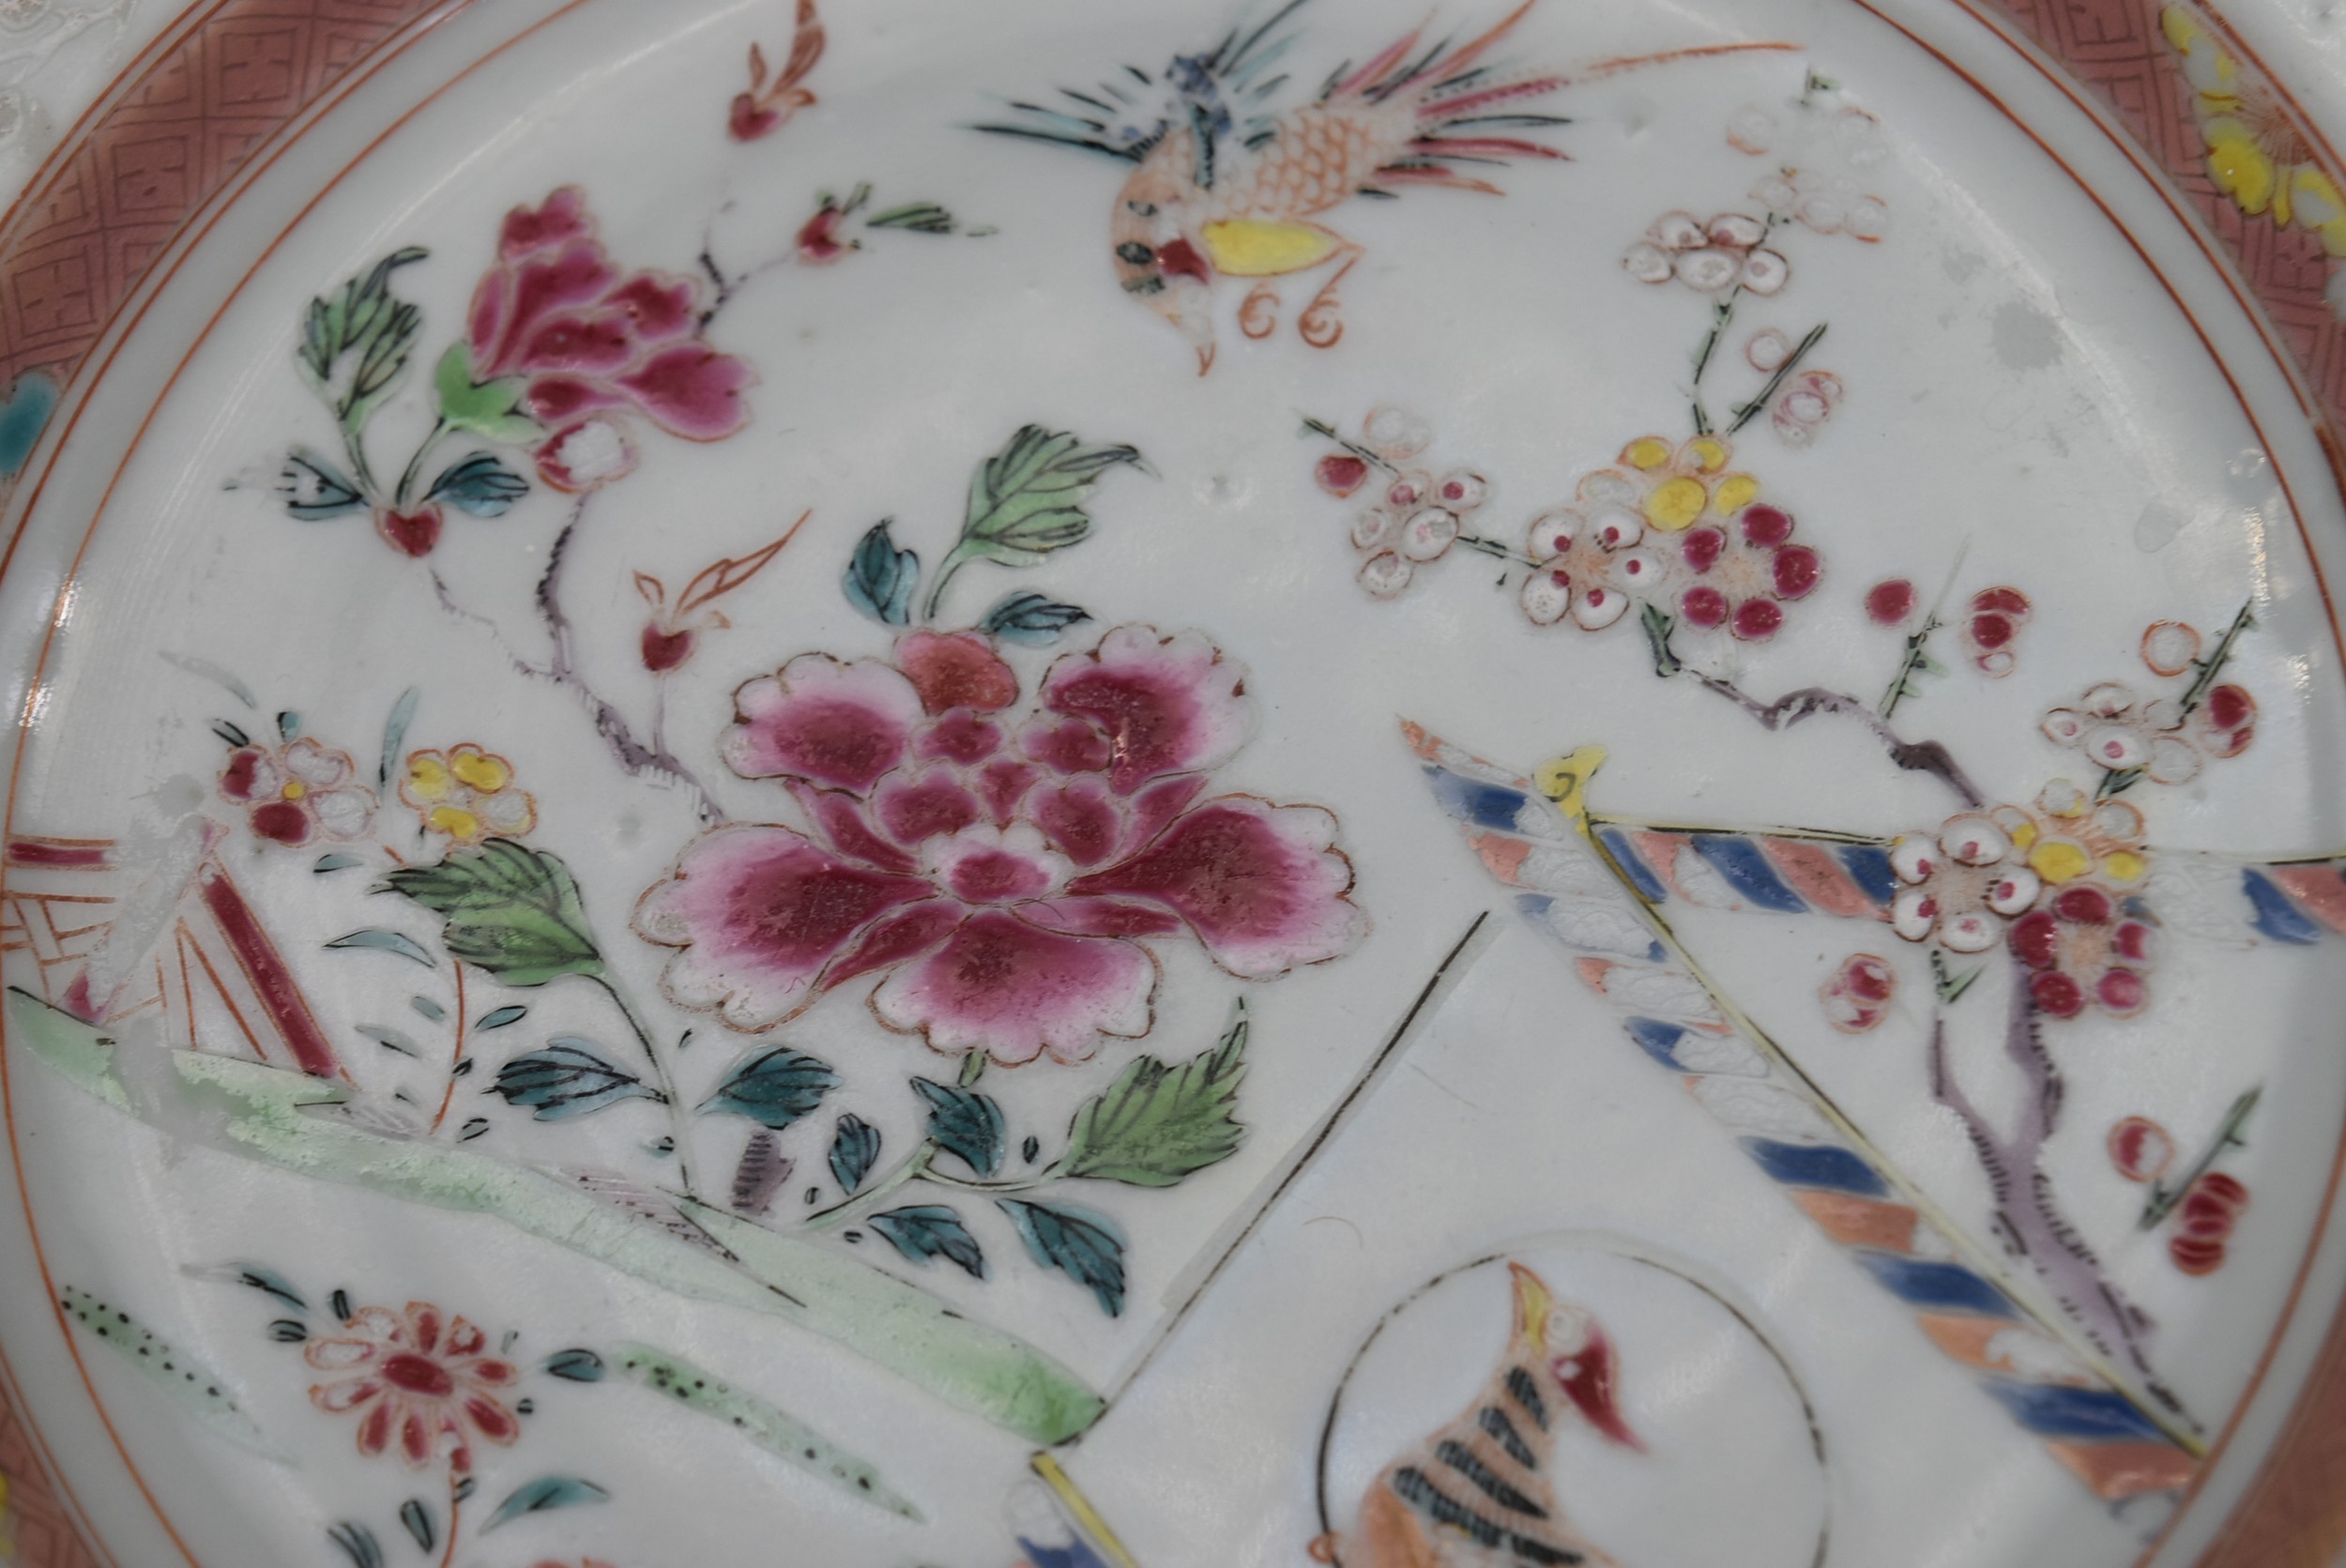 An 18th century Famille Rose Chinese glazed porcelain plate with cuckoo and house design with - Image 2 of 5